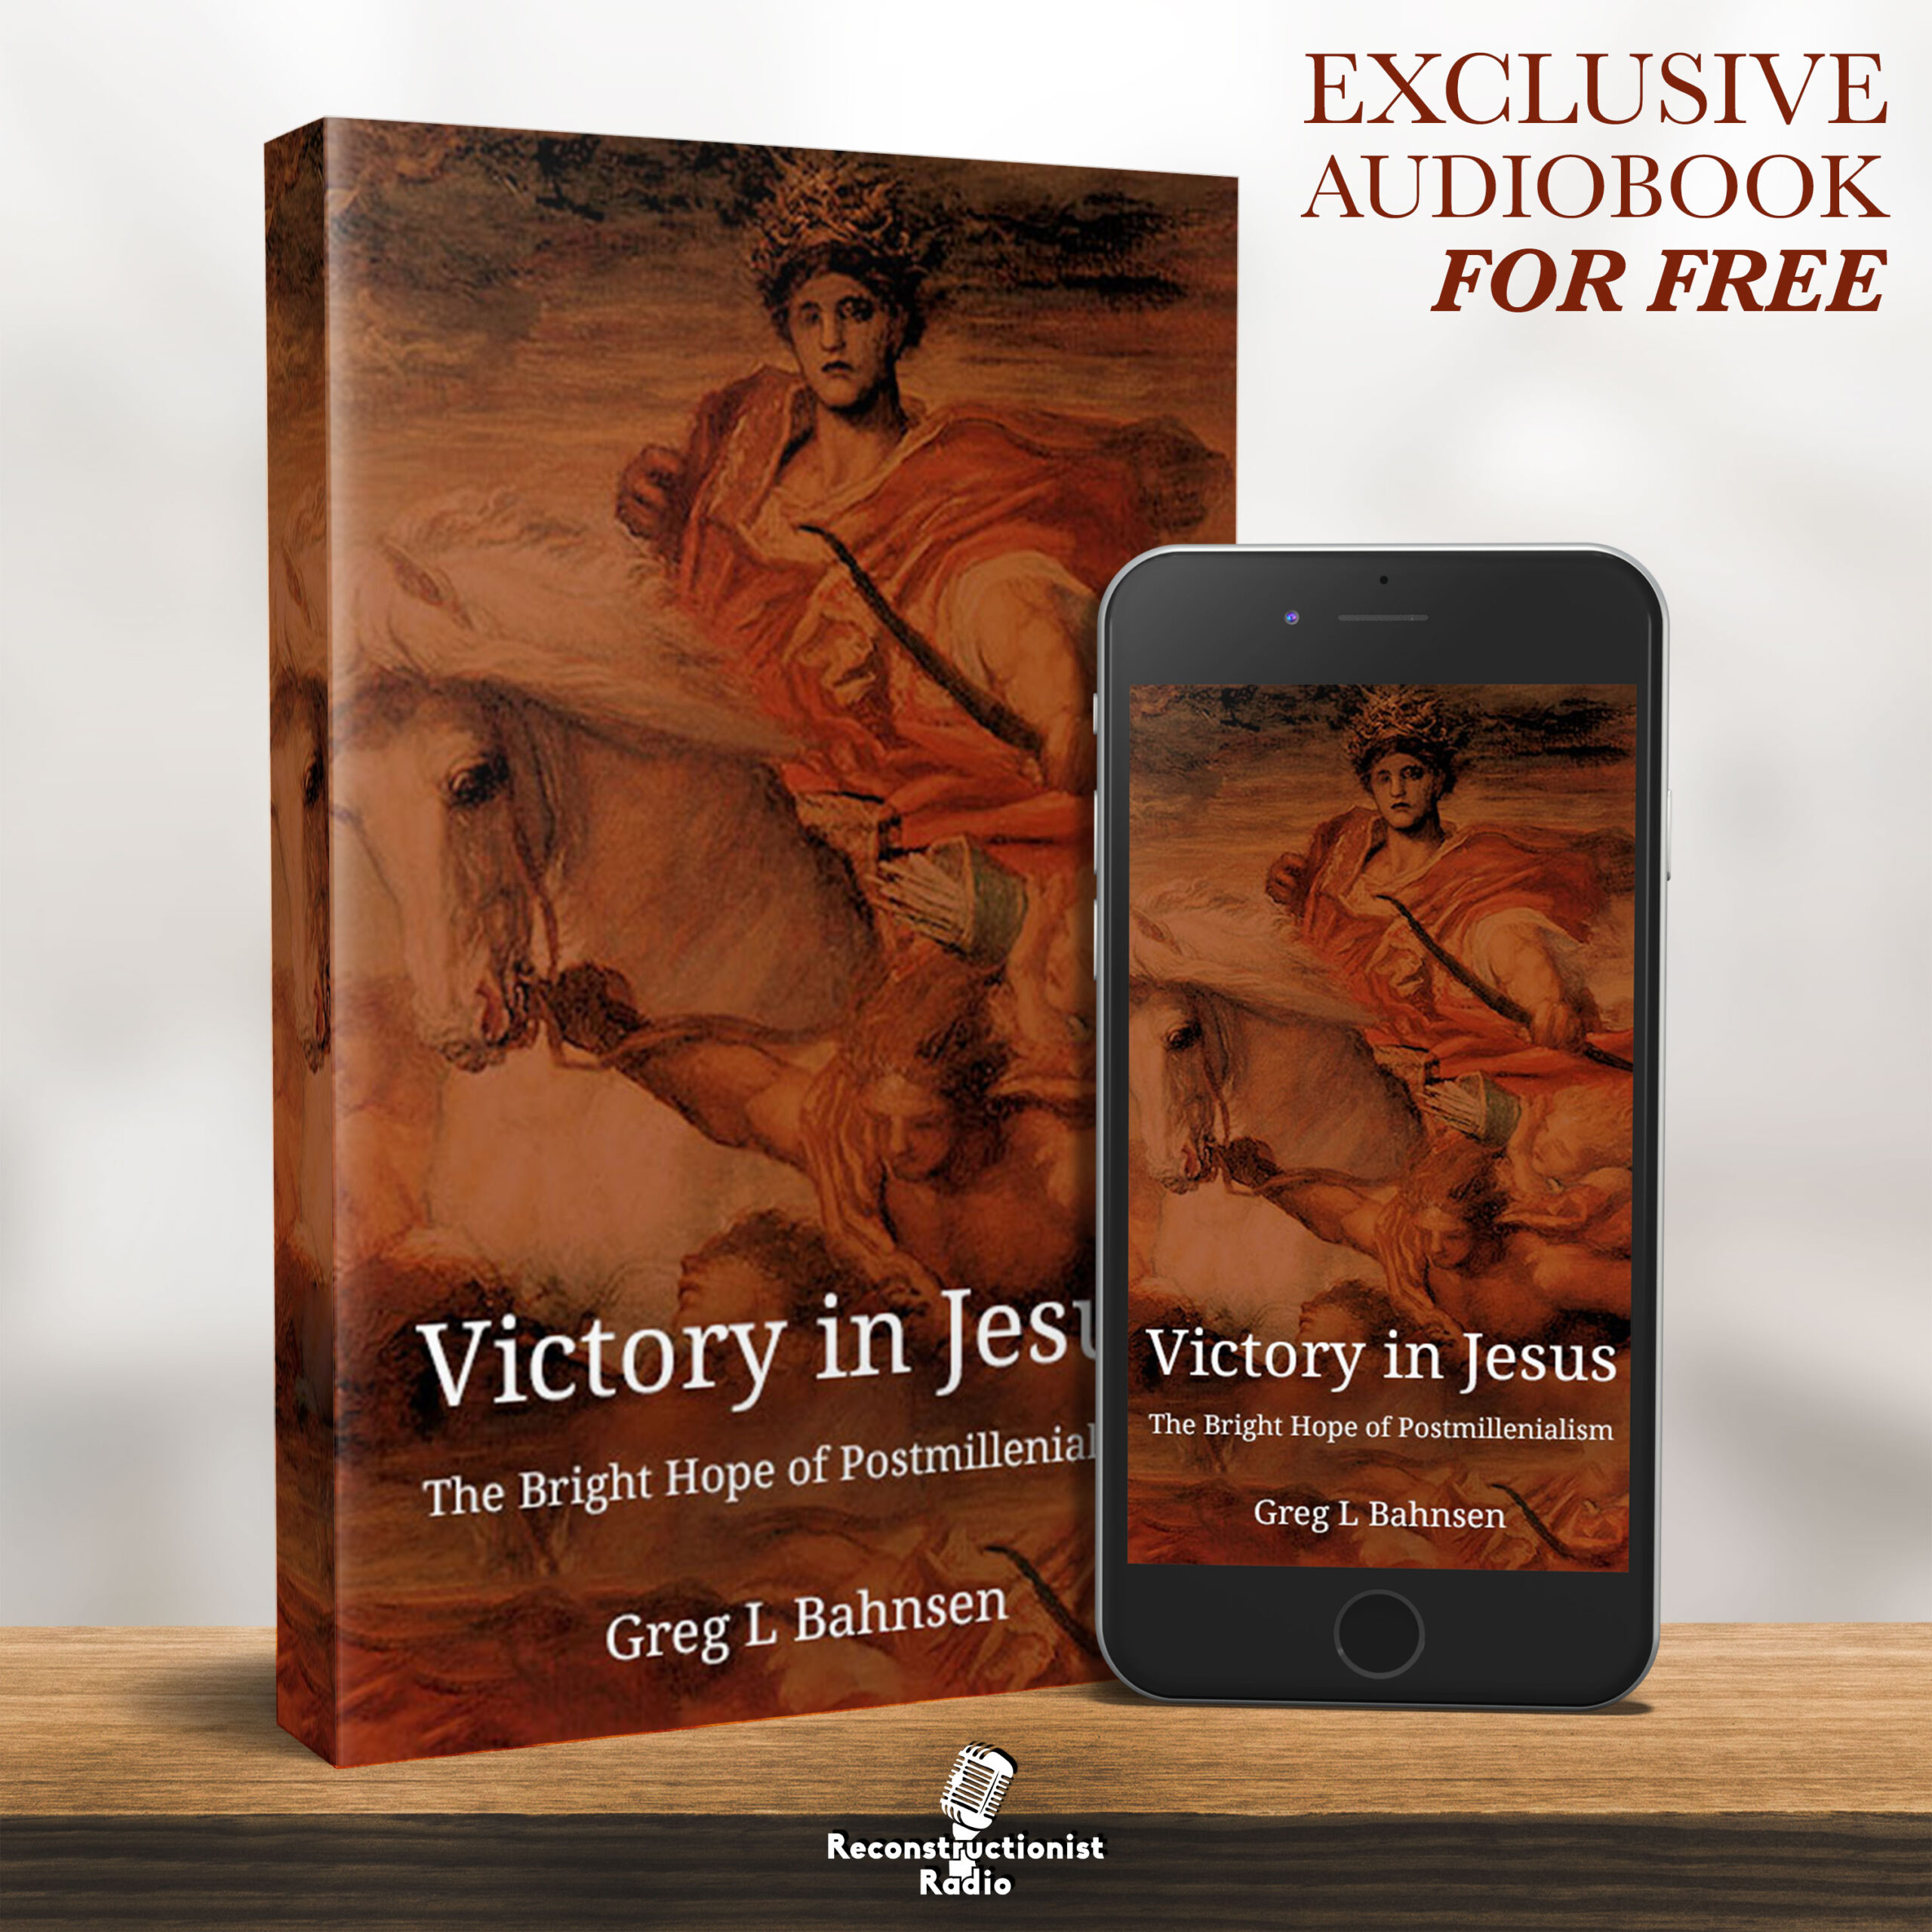 Victory In Jesus: The Bright Hope of Postmillennialism - Reconstructionist Radio (Audiobook)